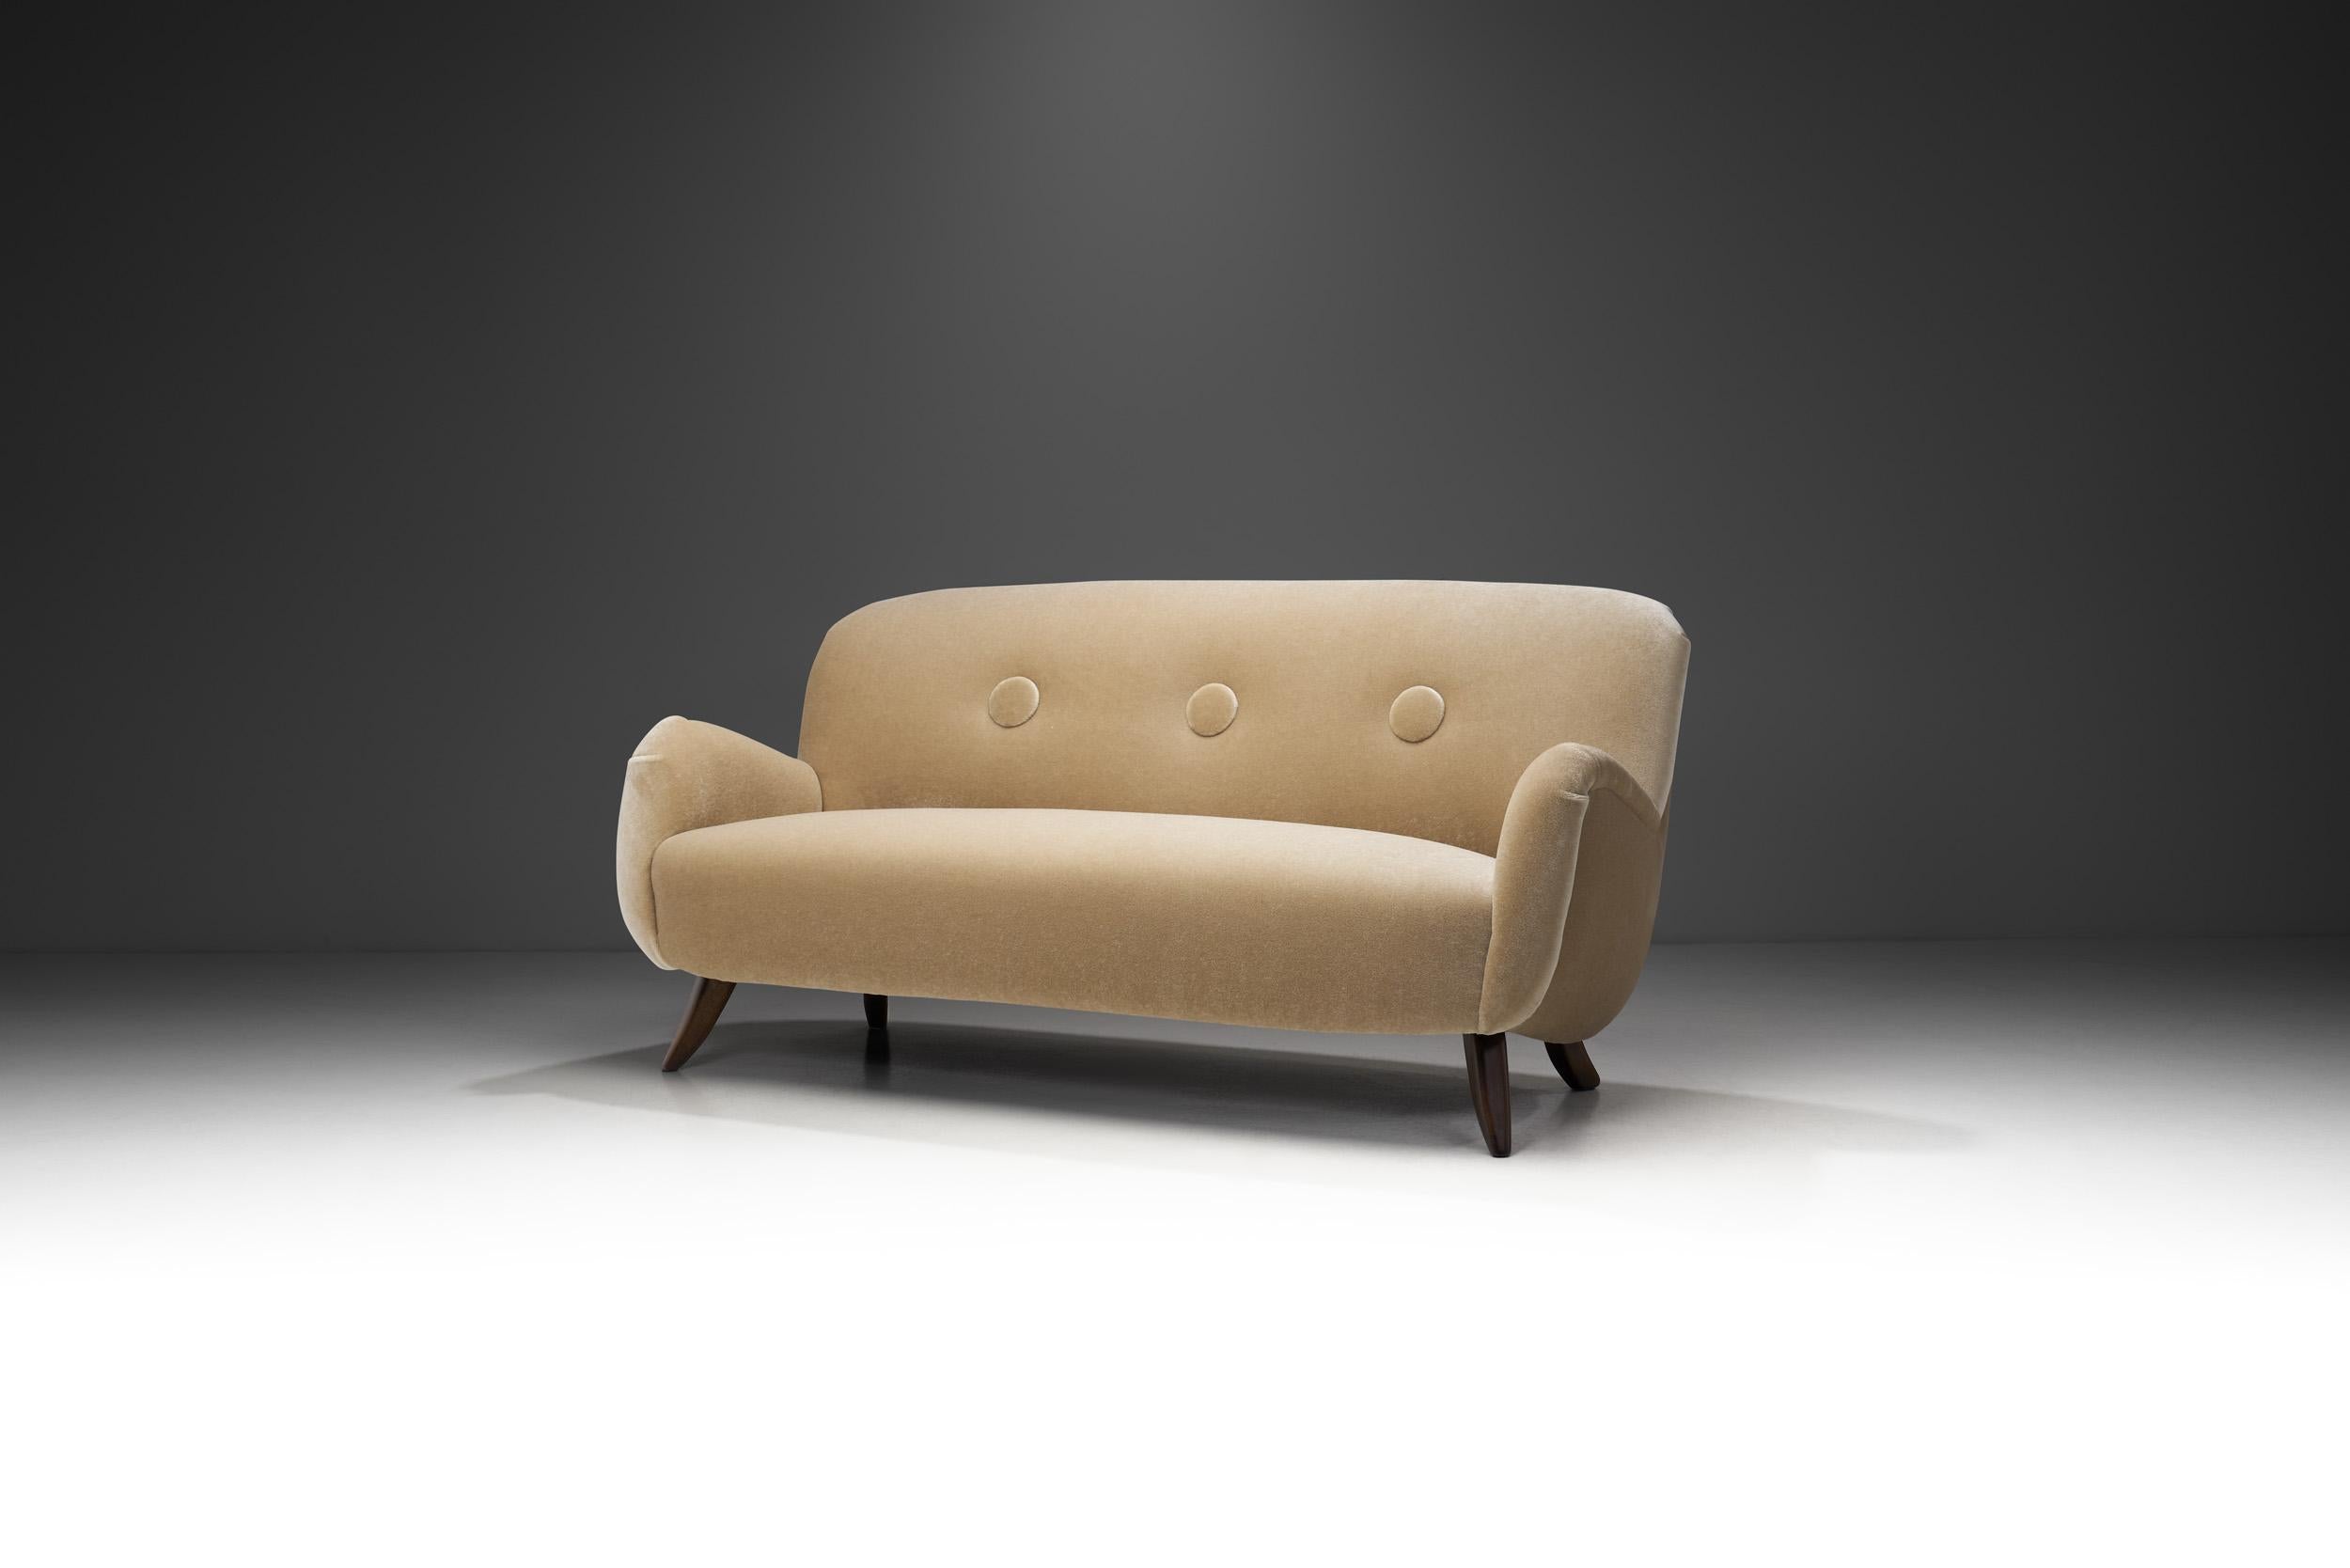 Designed in the early phase of what we know today as mid-century modern, this charming sofa is a unique evidence of how traditional Swedish craftsmanship was brought into modernism. A functional anchor piece is all that is needed to introduce